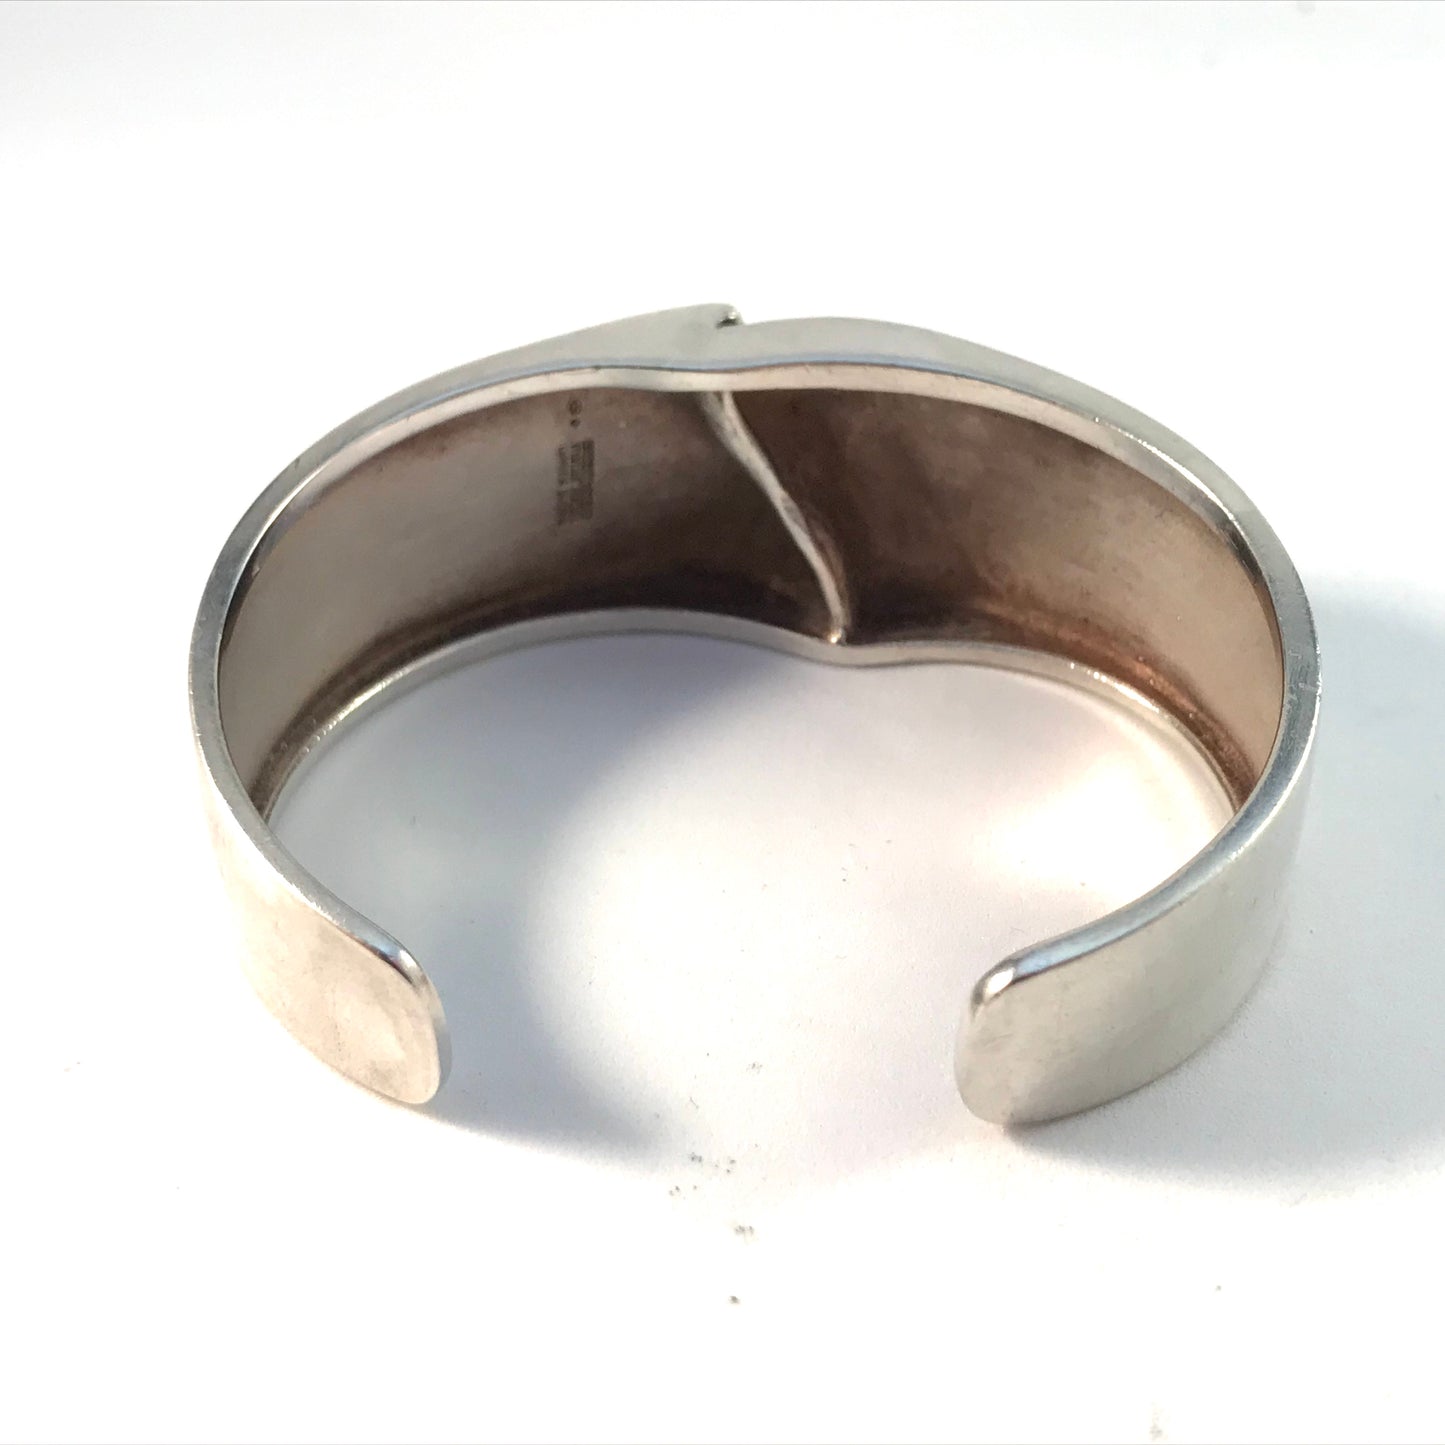 Bjorn Weckstrom for Lapponia Finland year 1972 Early Iconic Darina's Sterling Silver Cuff Bangle Bracelet